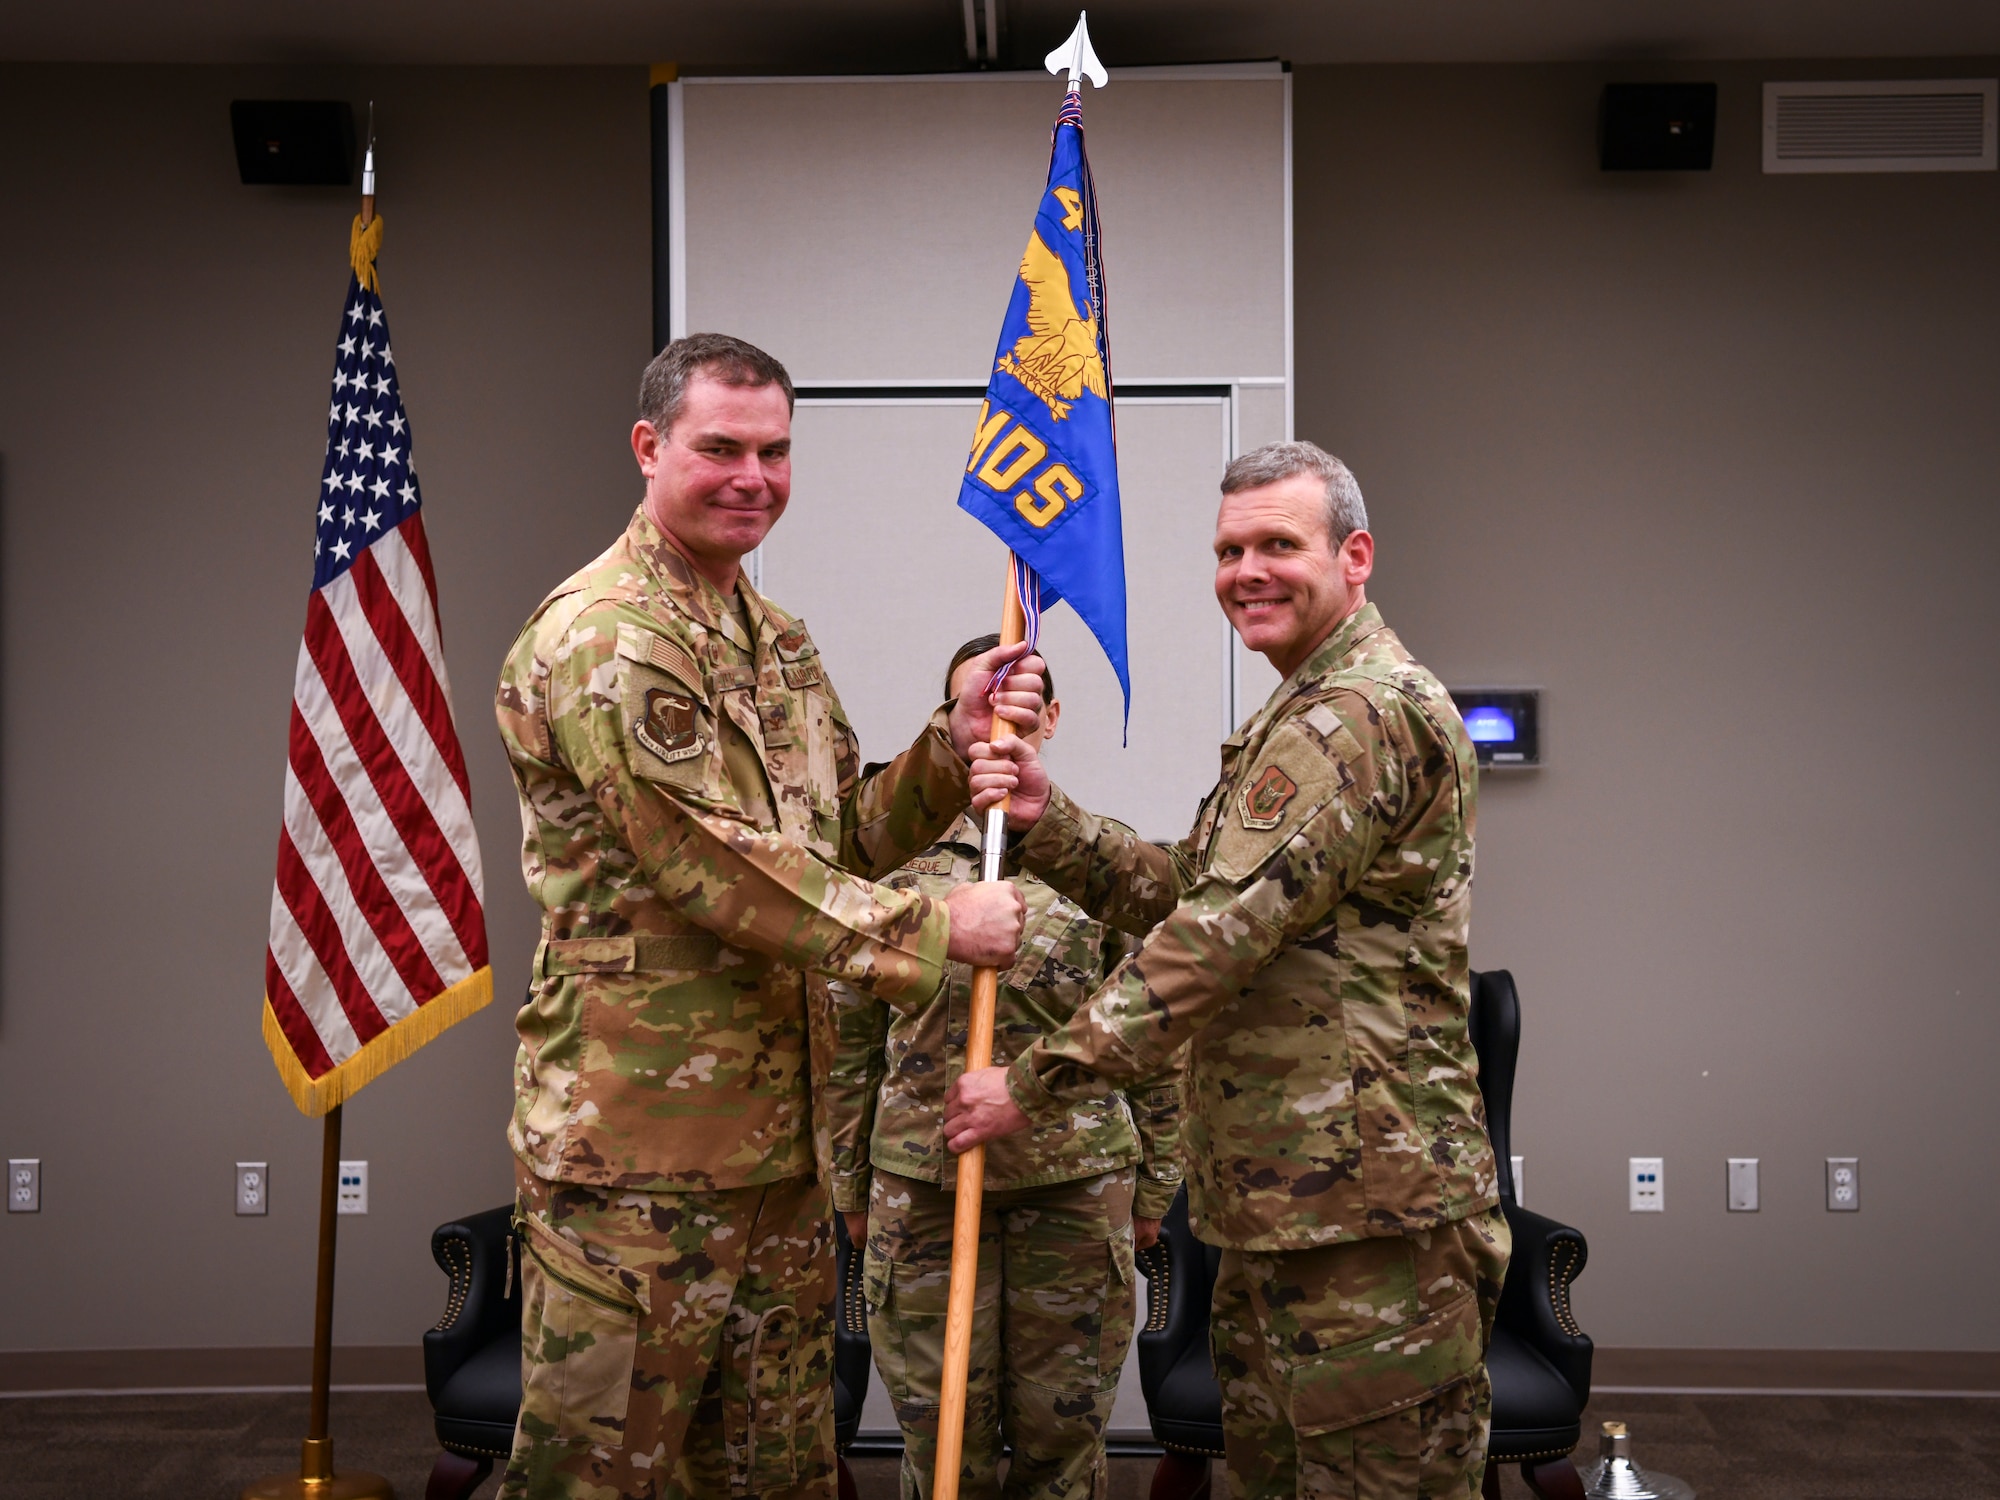 Two men in camo pattern uniforms pose with a blue guidon flag during a ceremony.